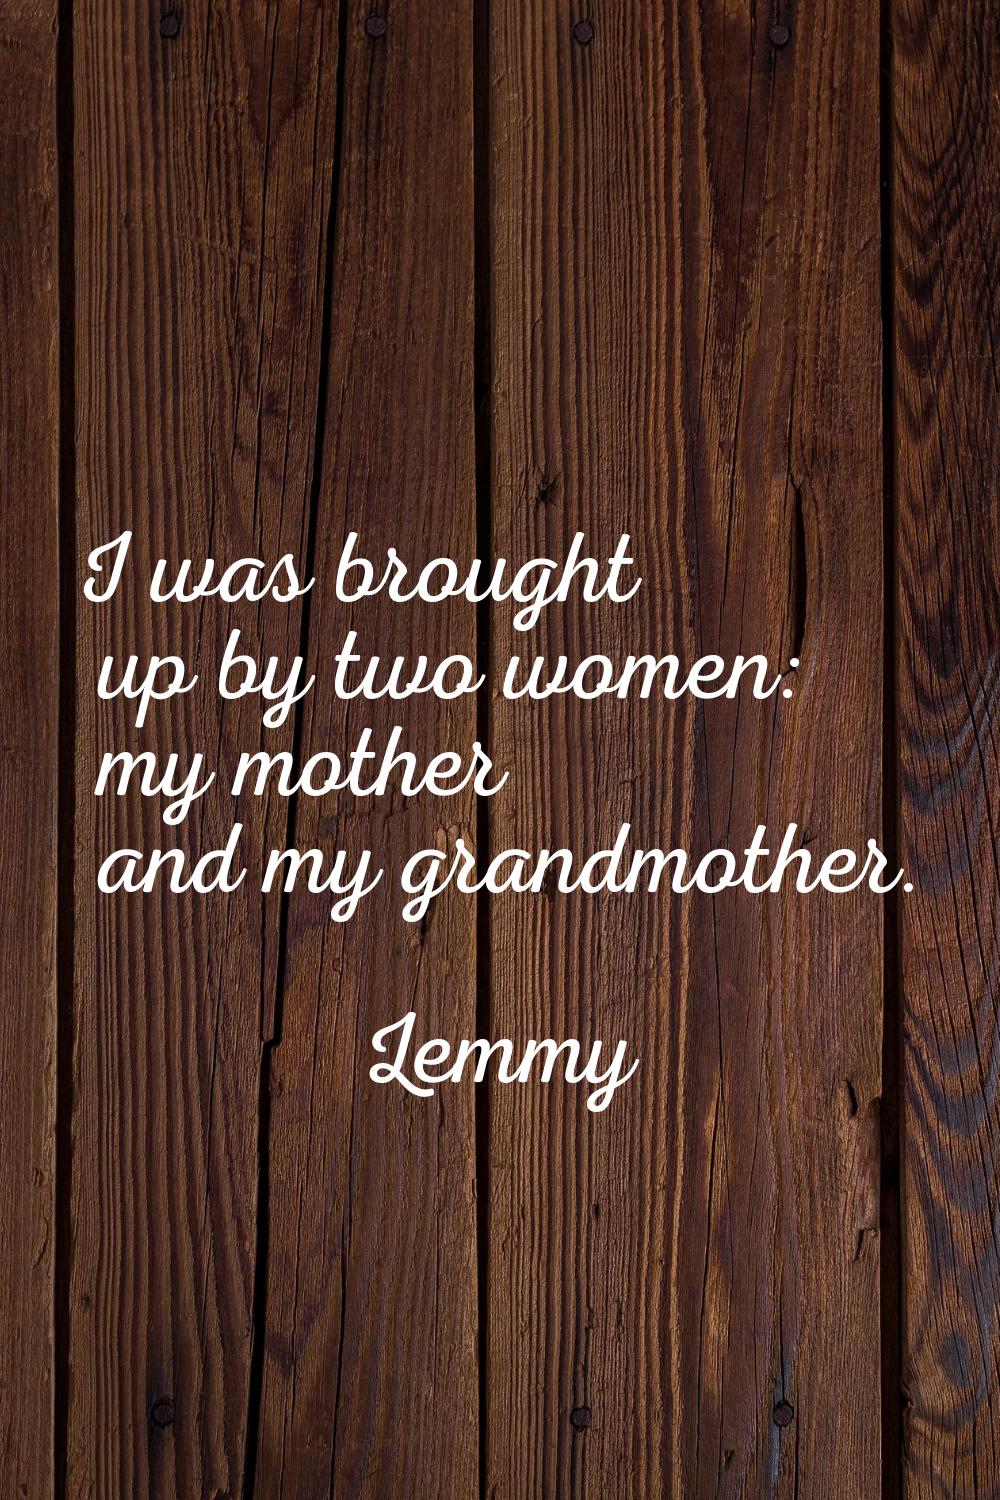 I was brought up by two women: my mother and my grandmother.